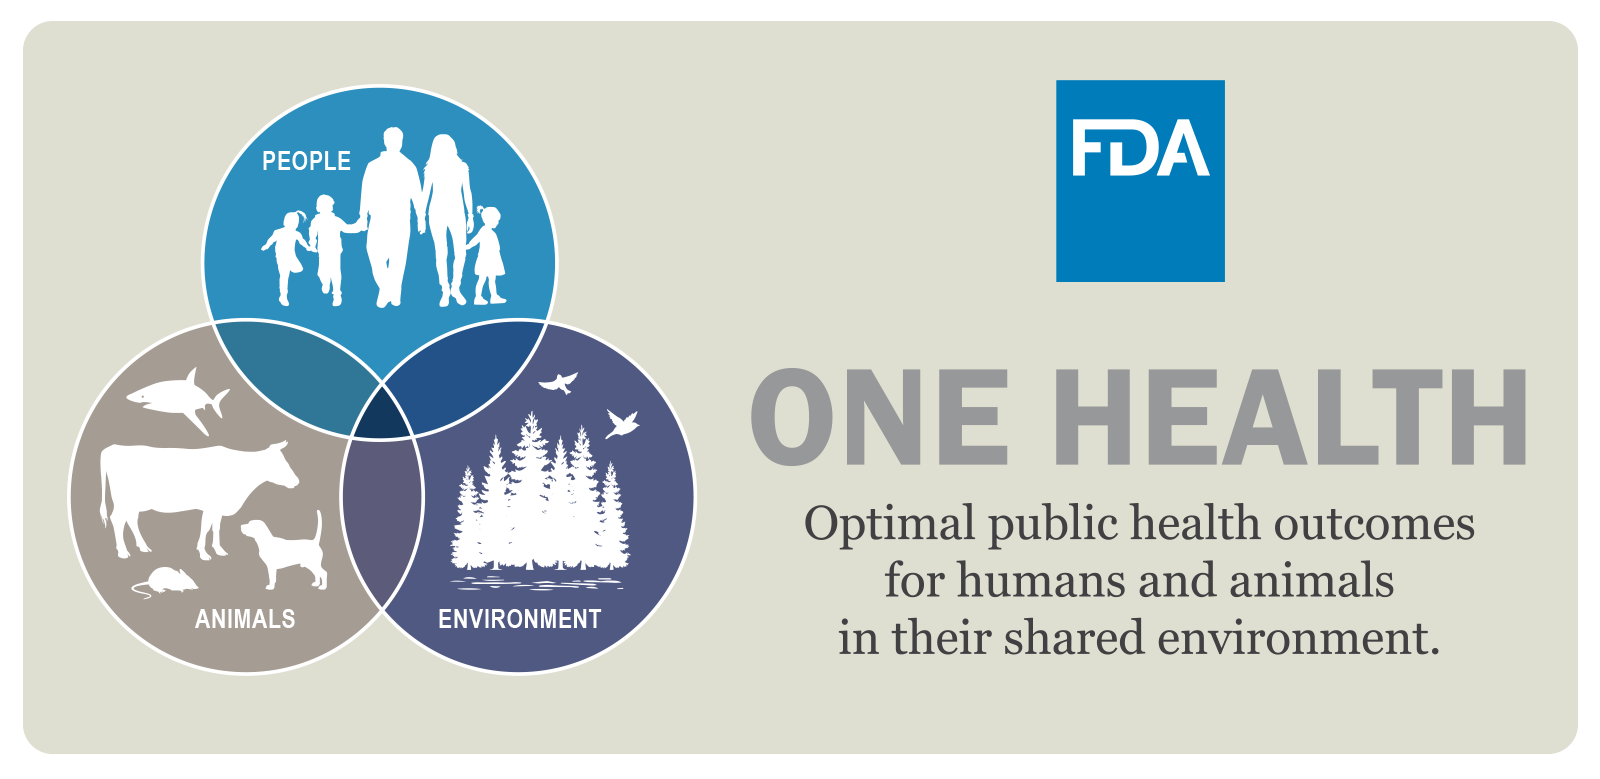 OneHealth graphic showing a venn diagram illustrating the inter-connectedness of people, animals and the environment.